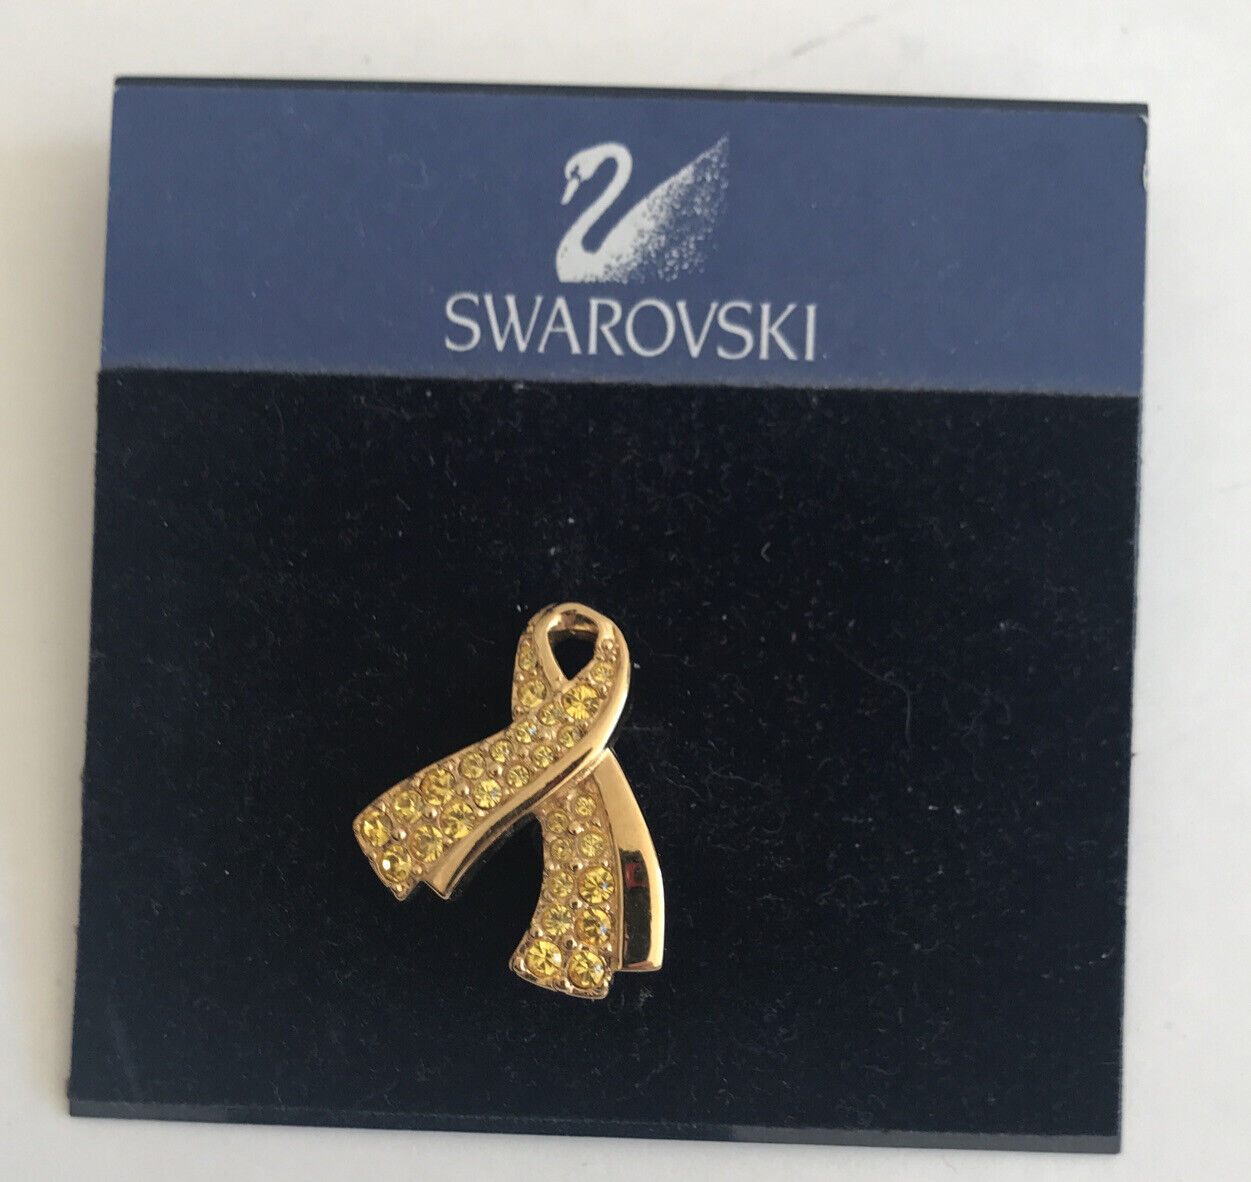 New Swarovski Yellow Pave Crystal Ribbon Support Our Troops USO